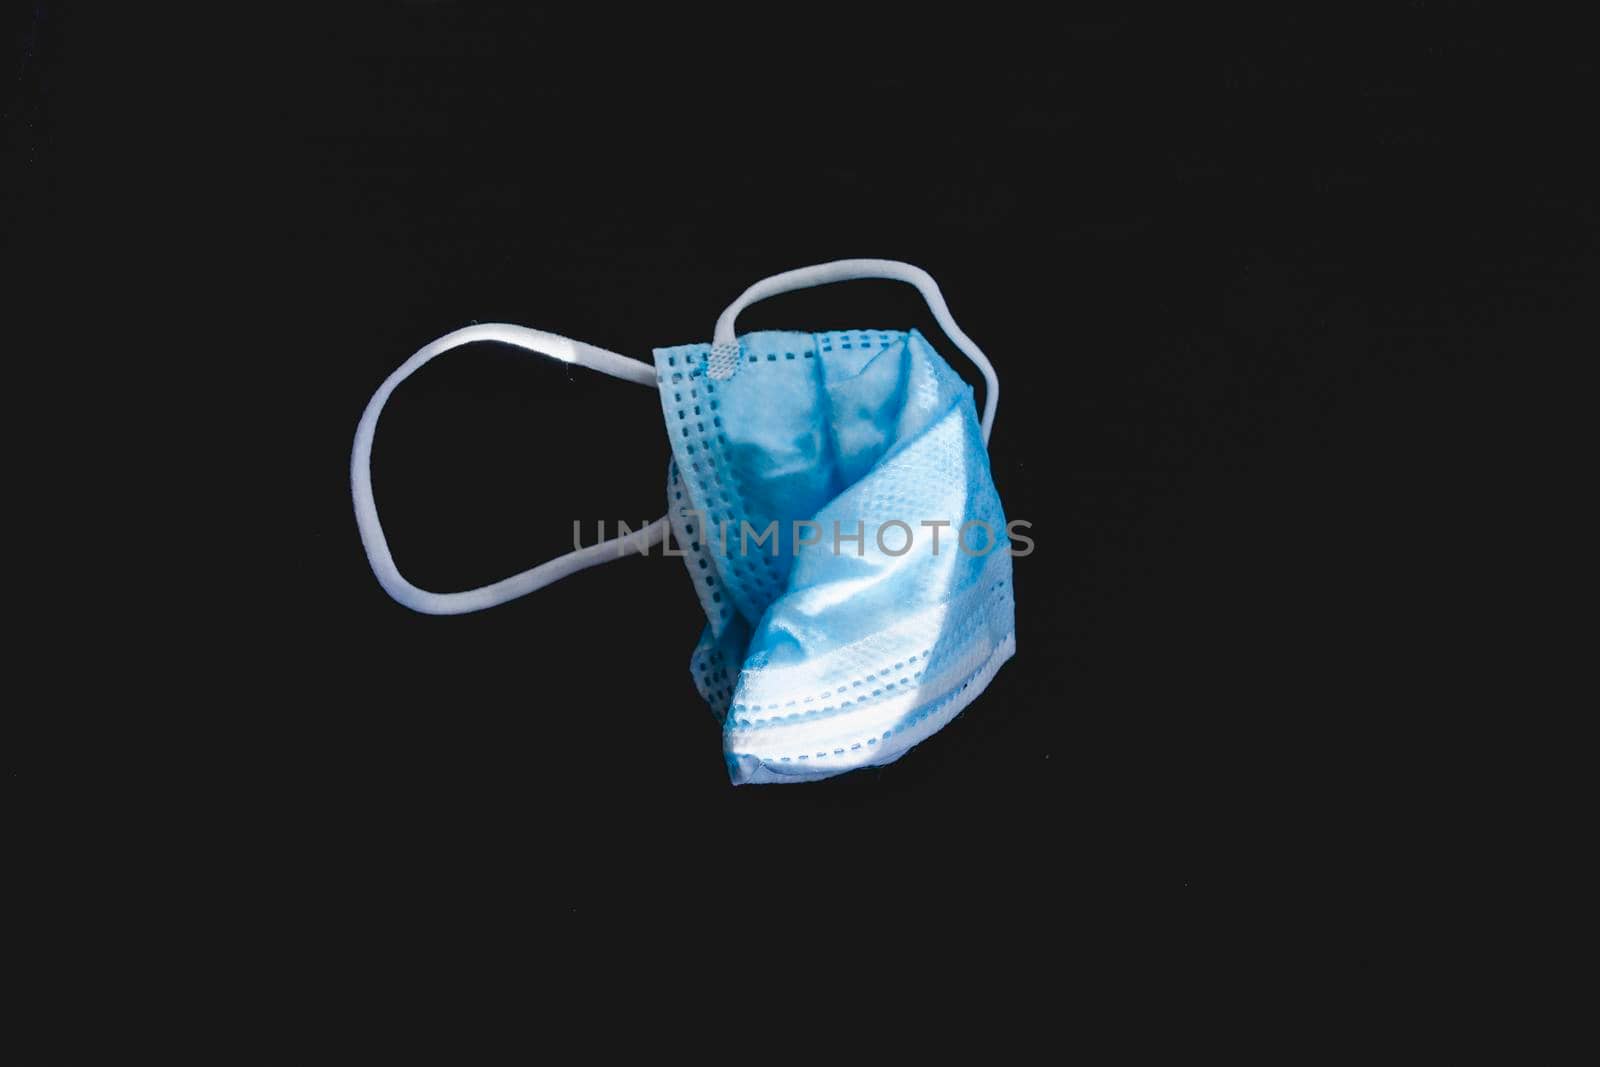 Disposed plastic protective face mask, on a dark background. by alvarobueno